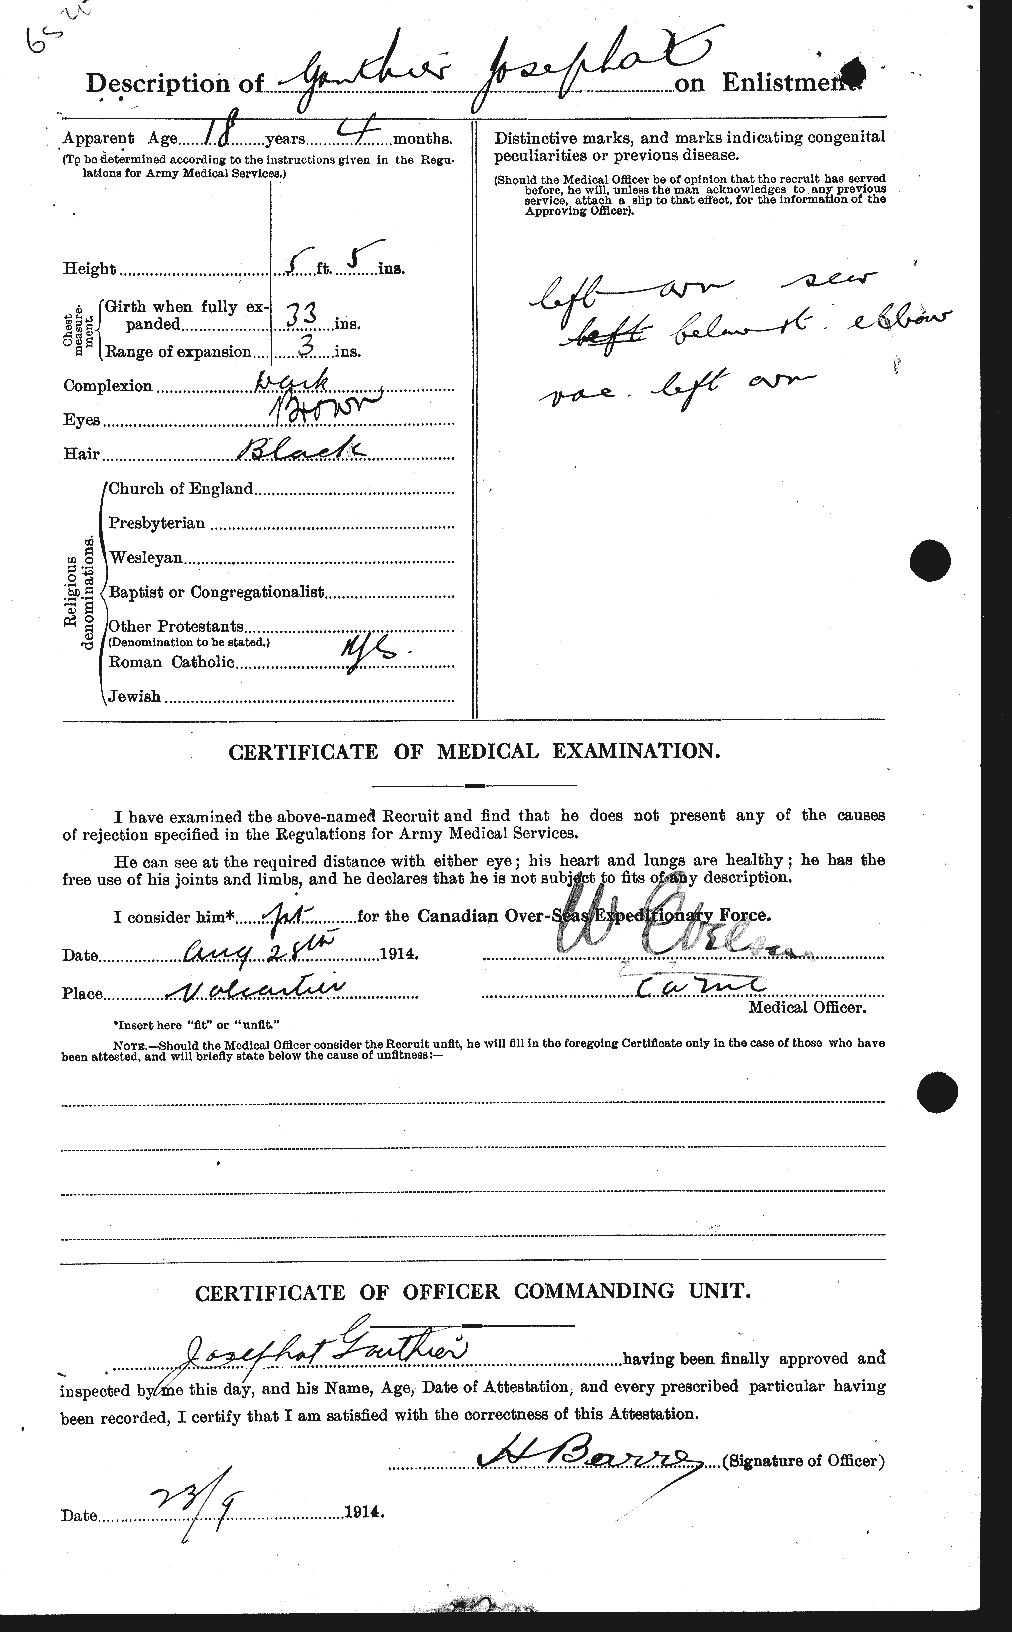 Personnel Records of the First World War - CEF 342357b